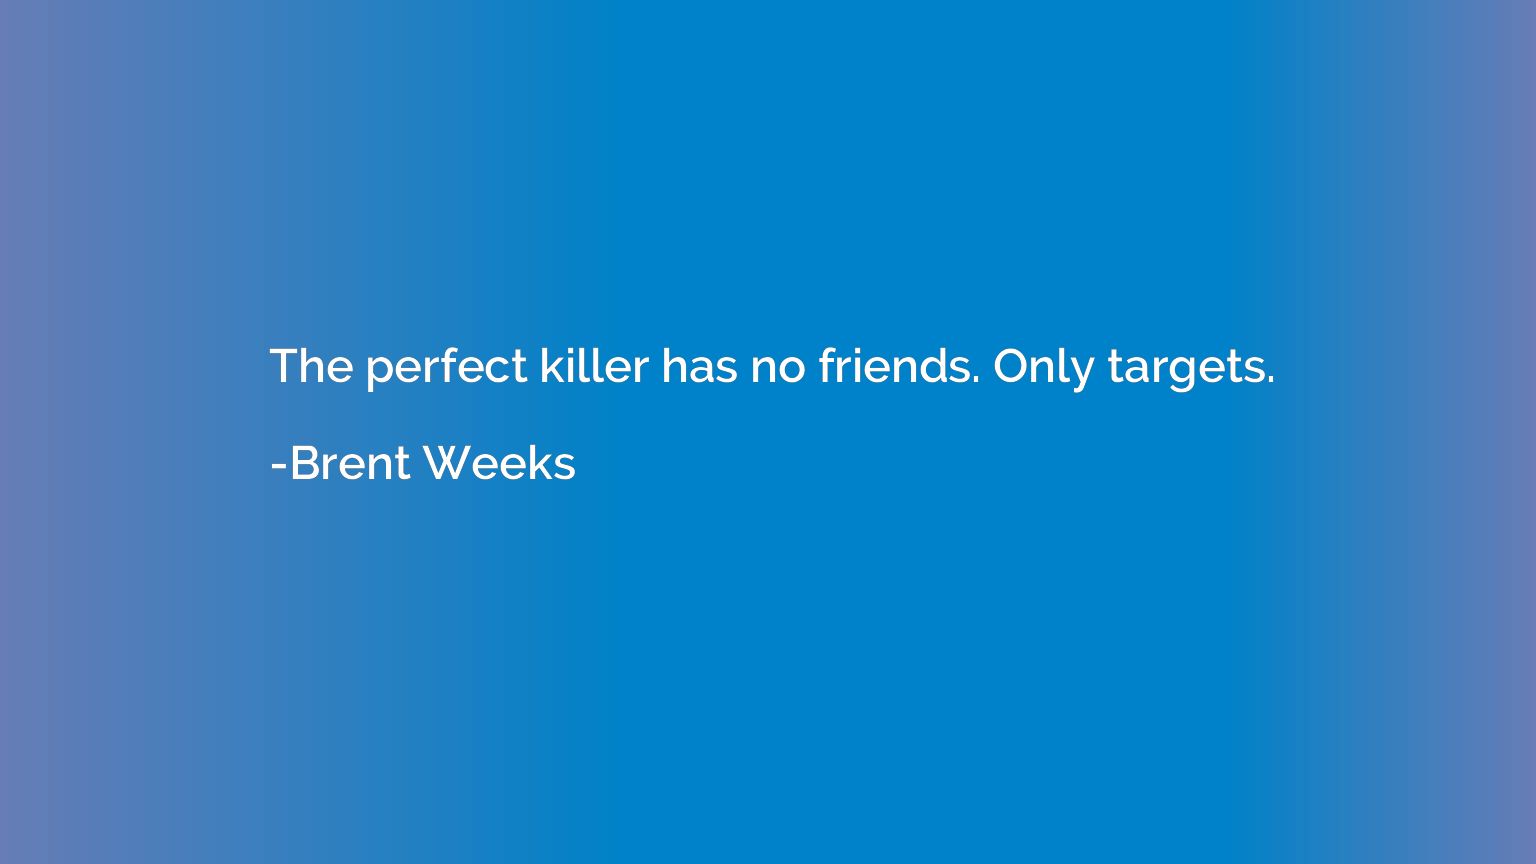 The perfect killer has no friends. Only targets.